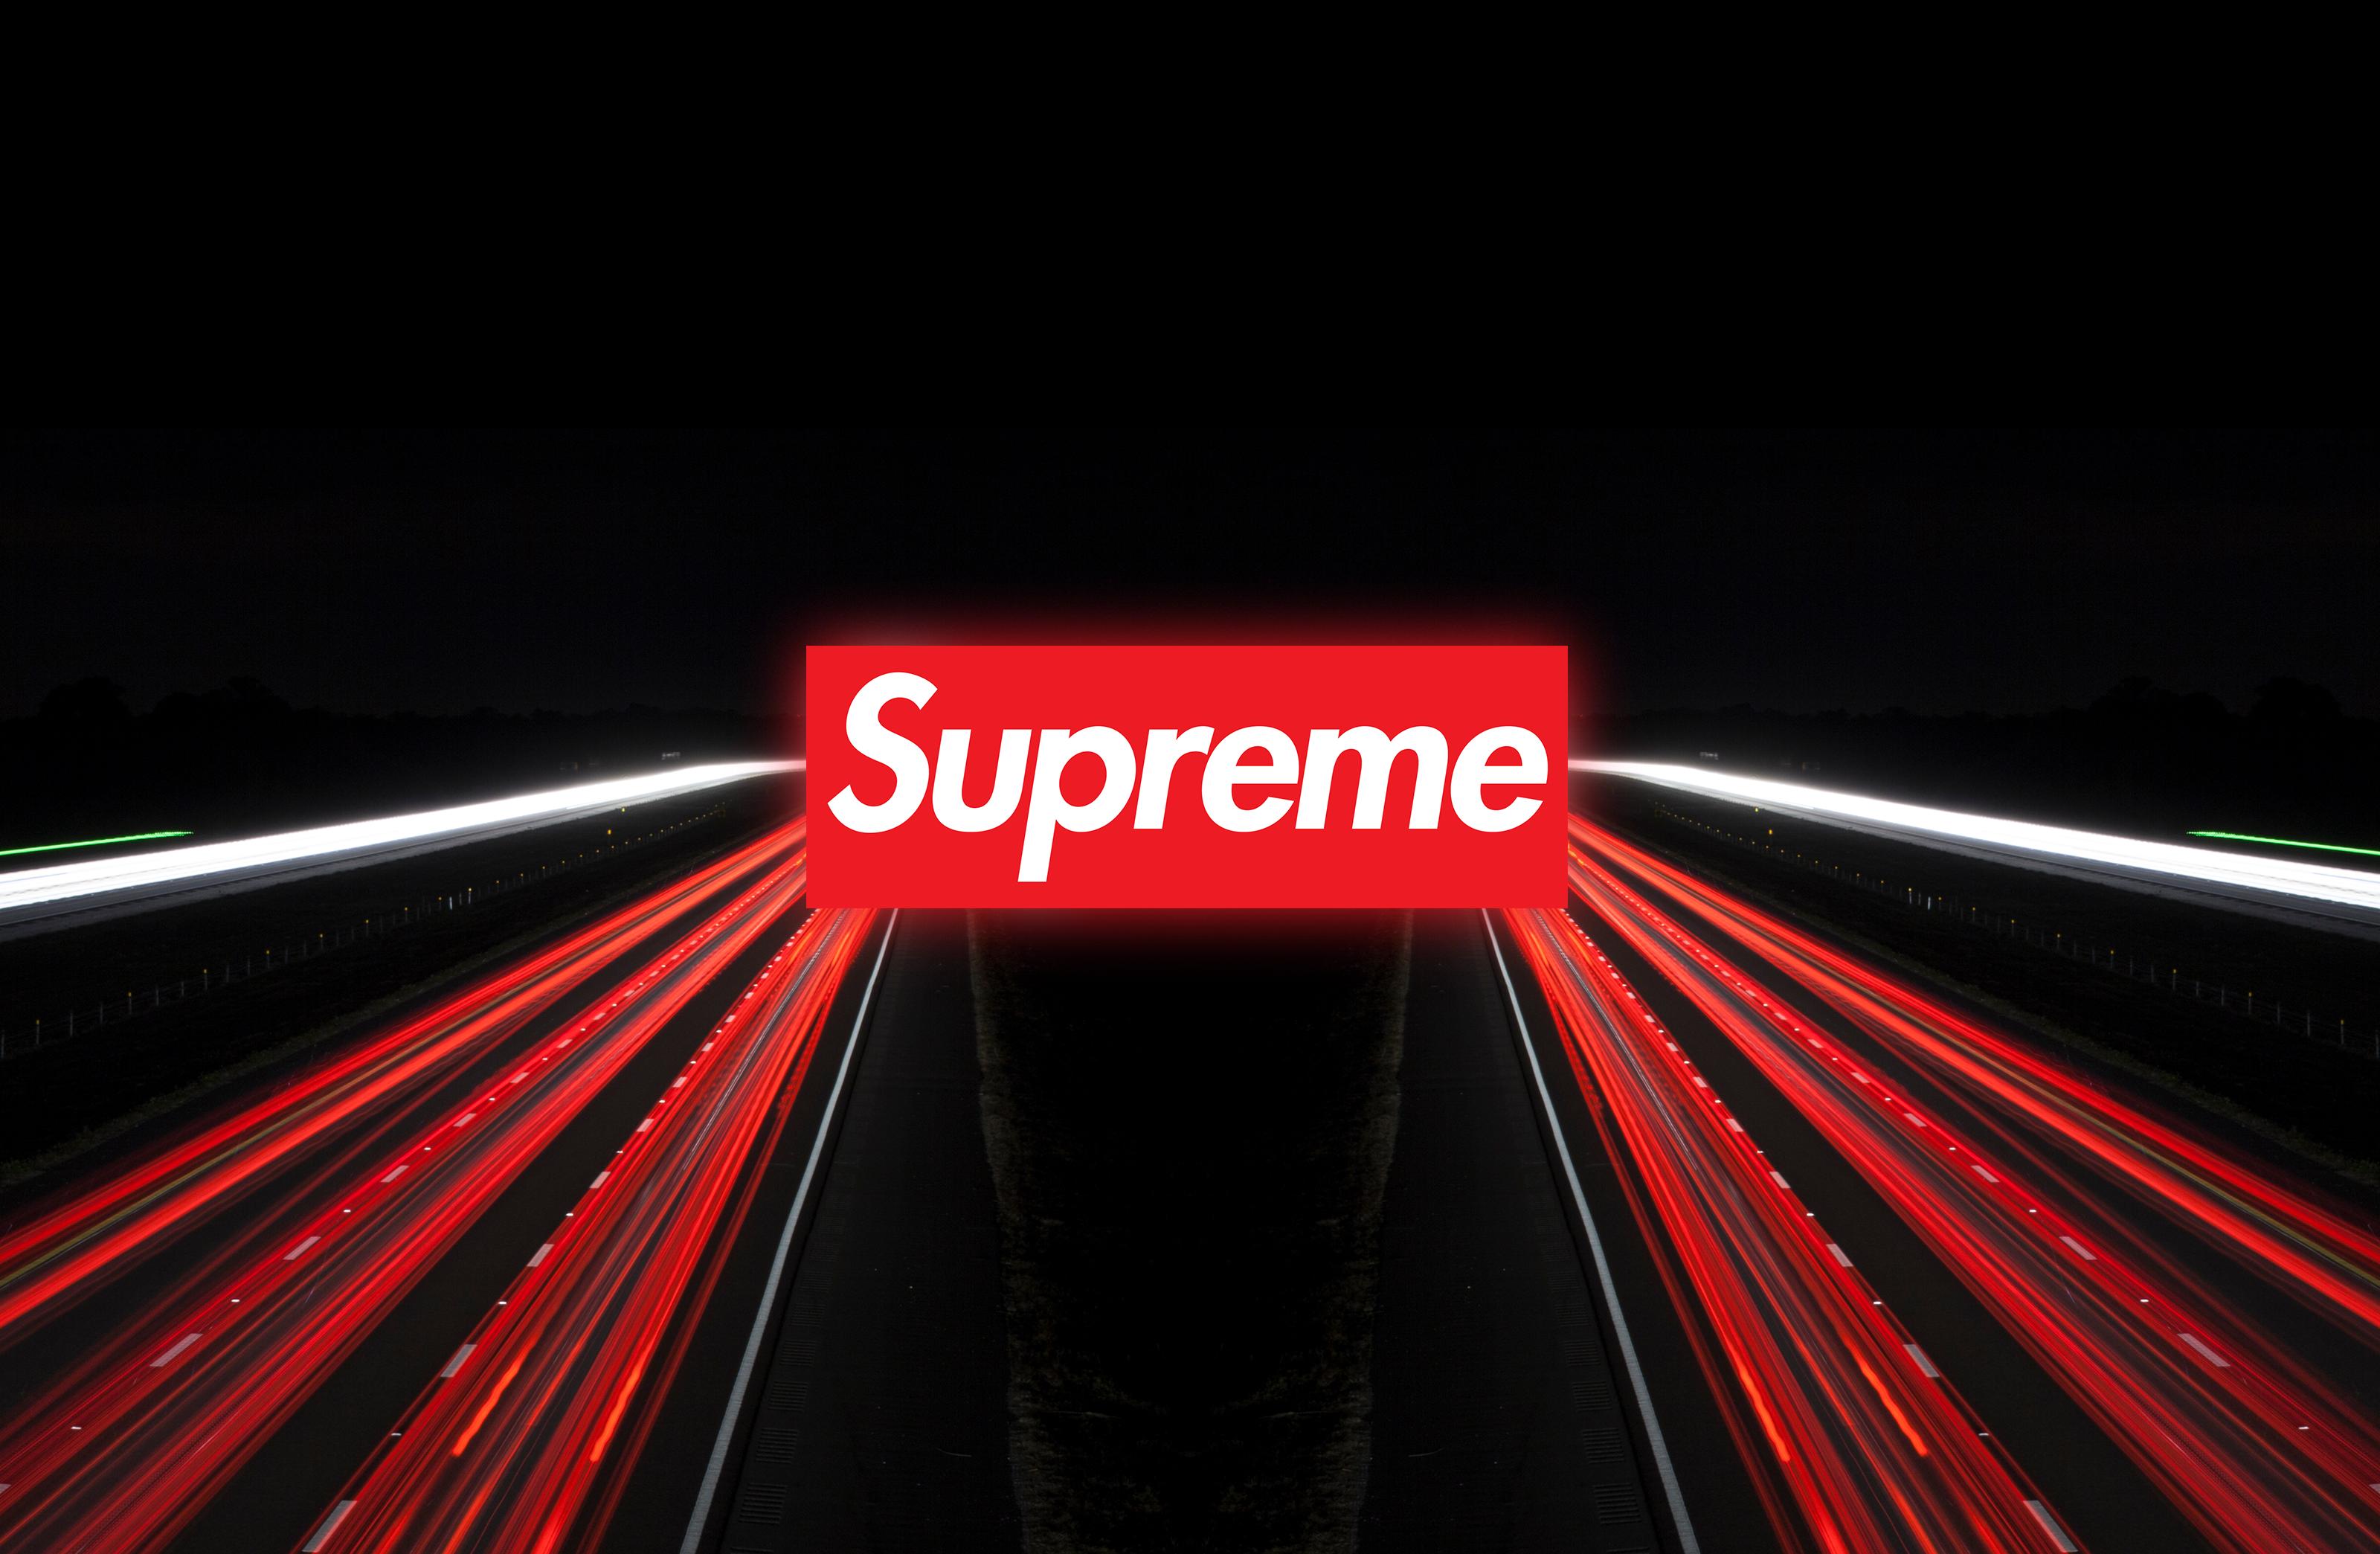 high res Supreme wallpaper that I made ????